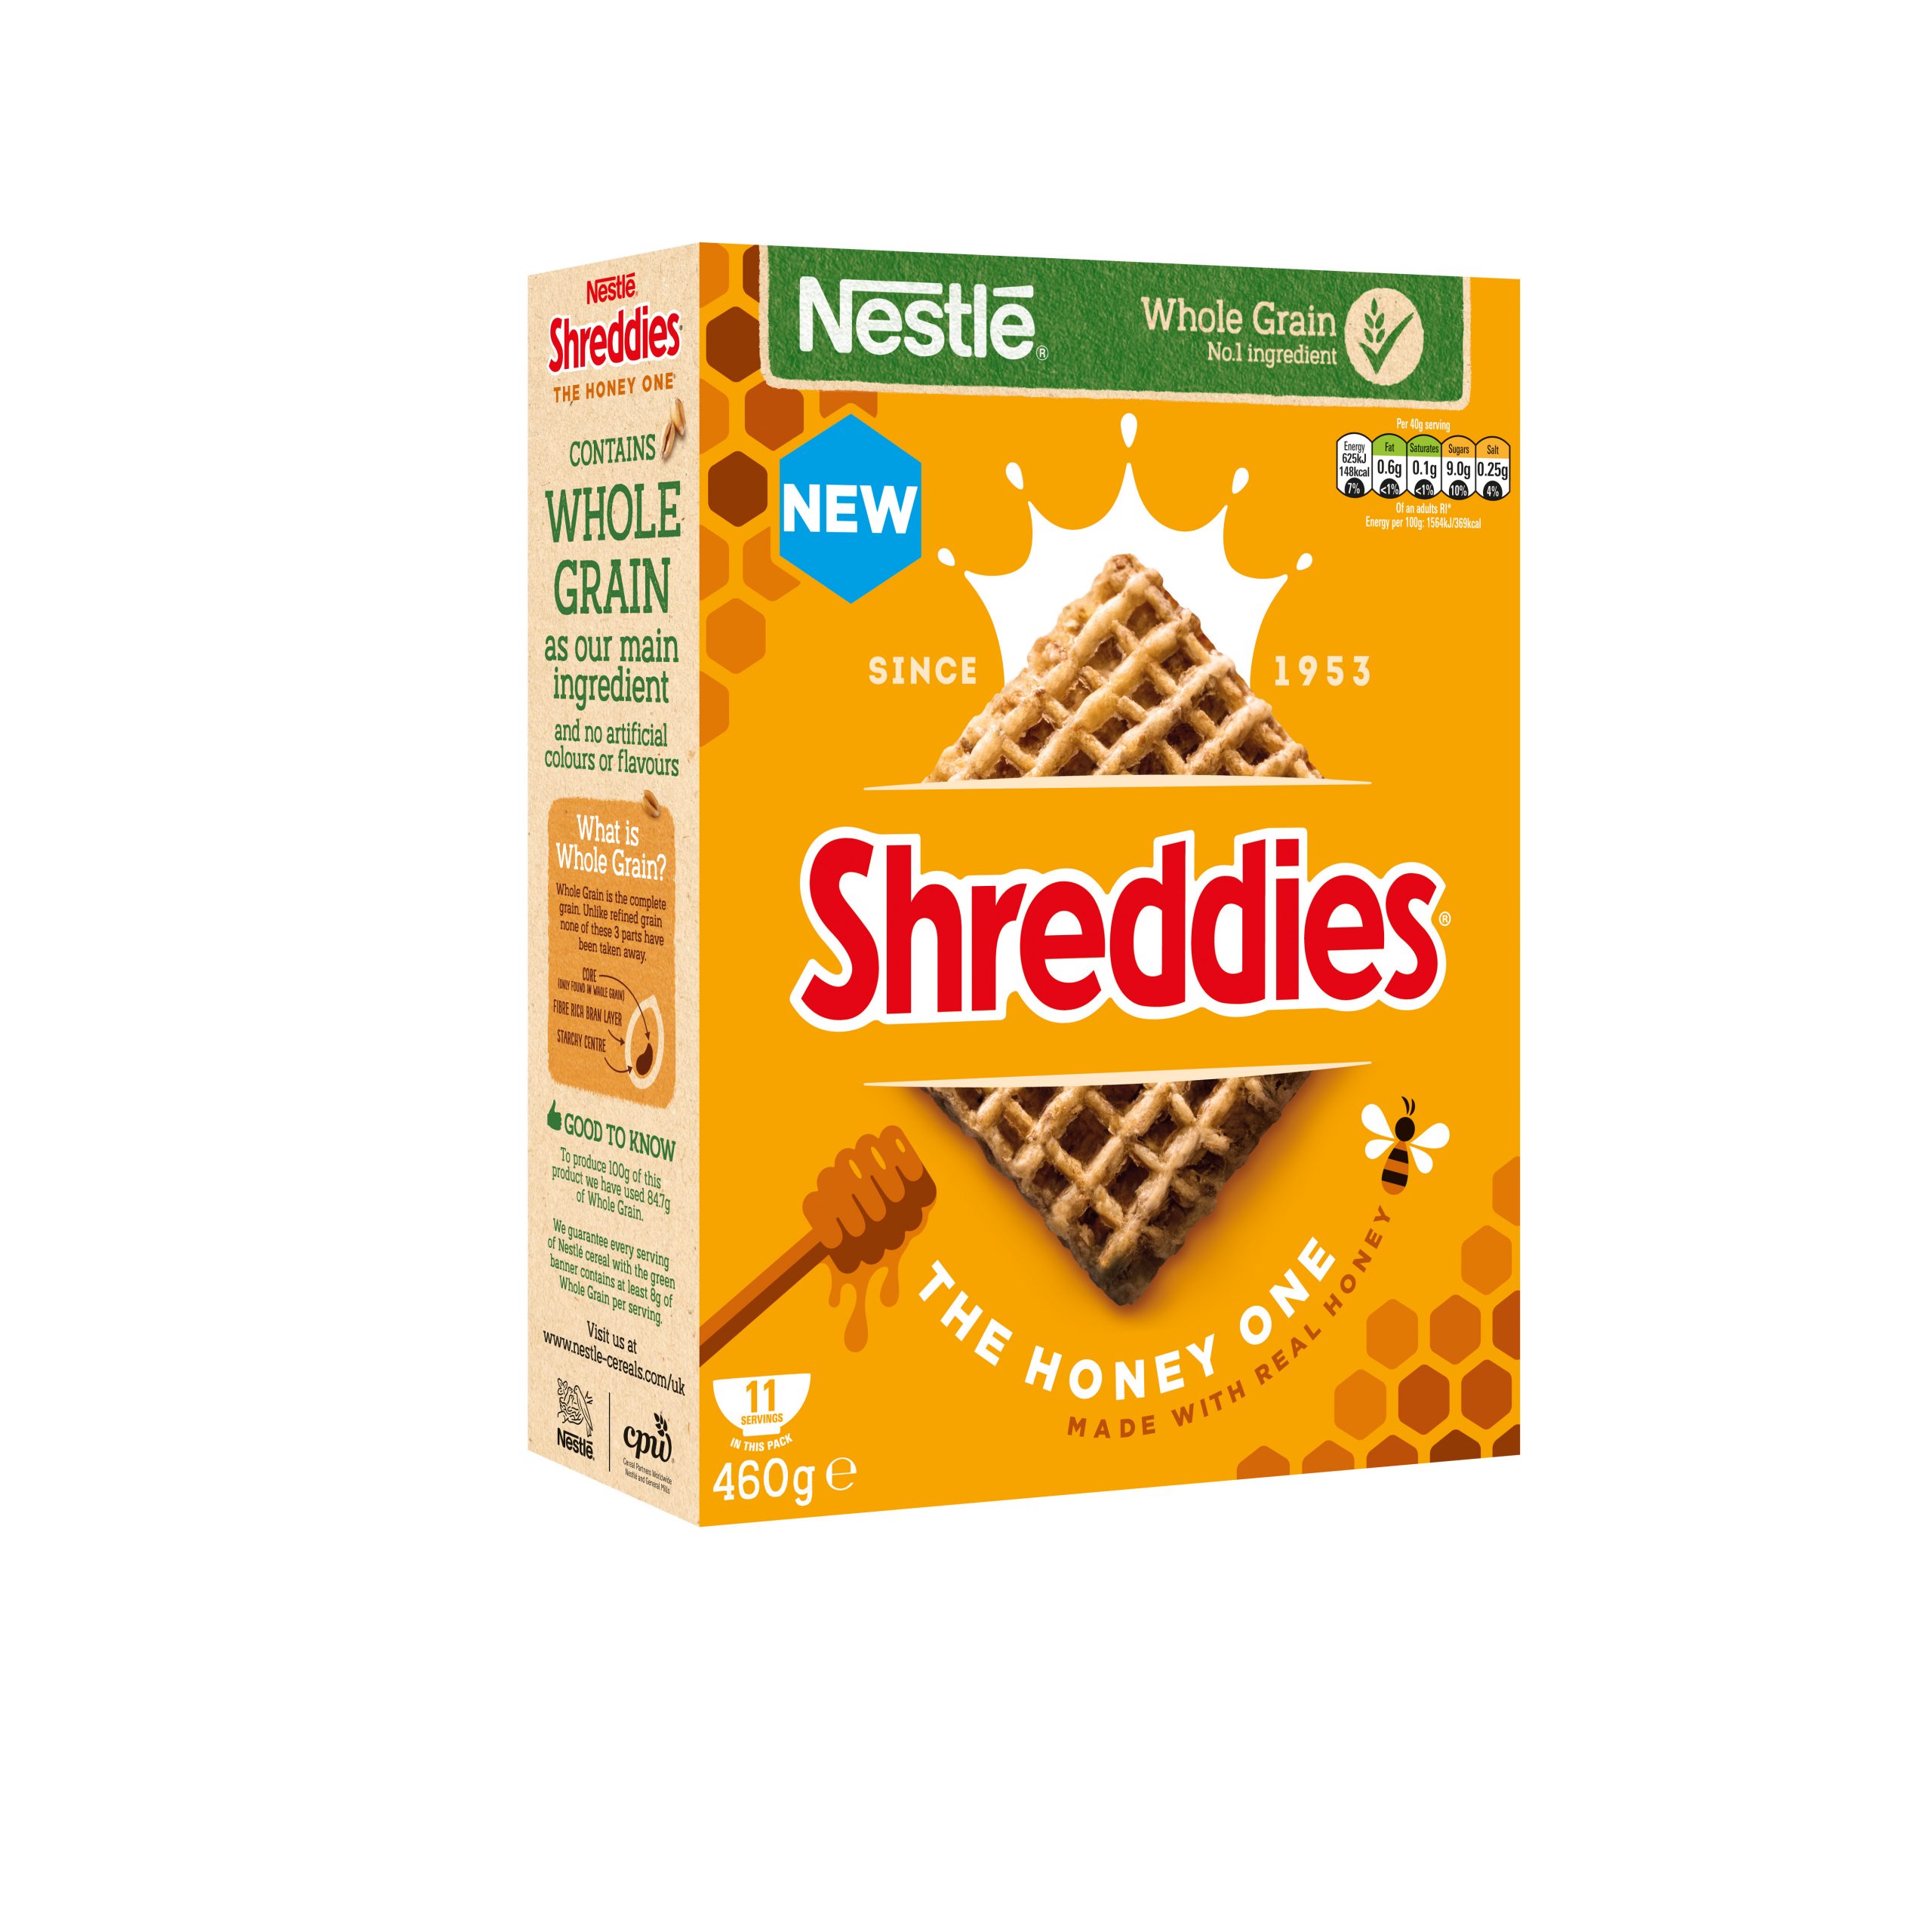 Shreddies ‘The Honey One’ hailed Best New Cereal at Product Of The Year awards